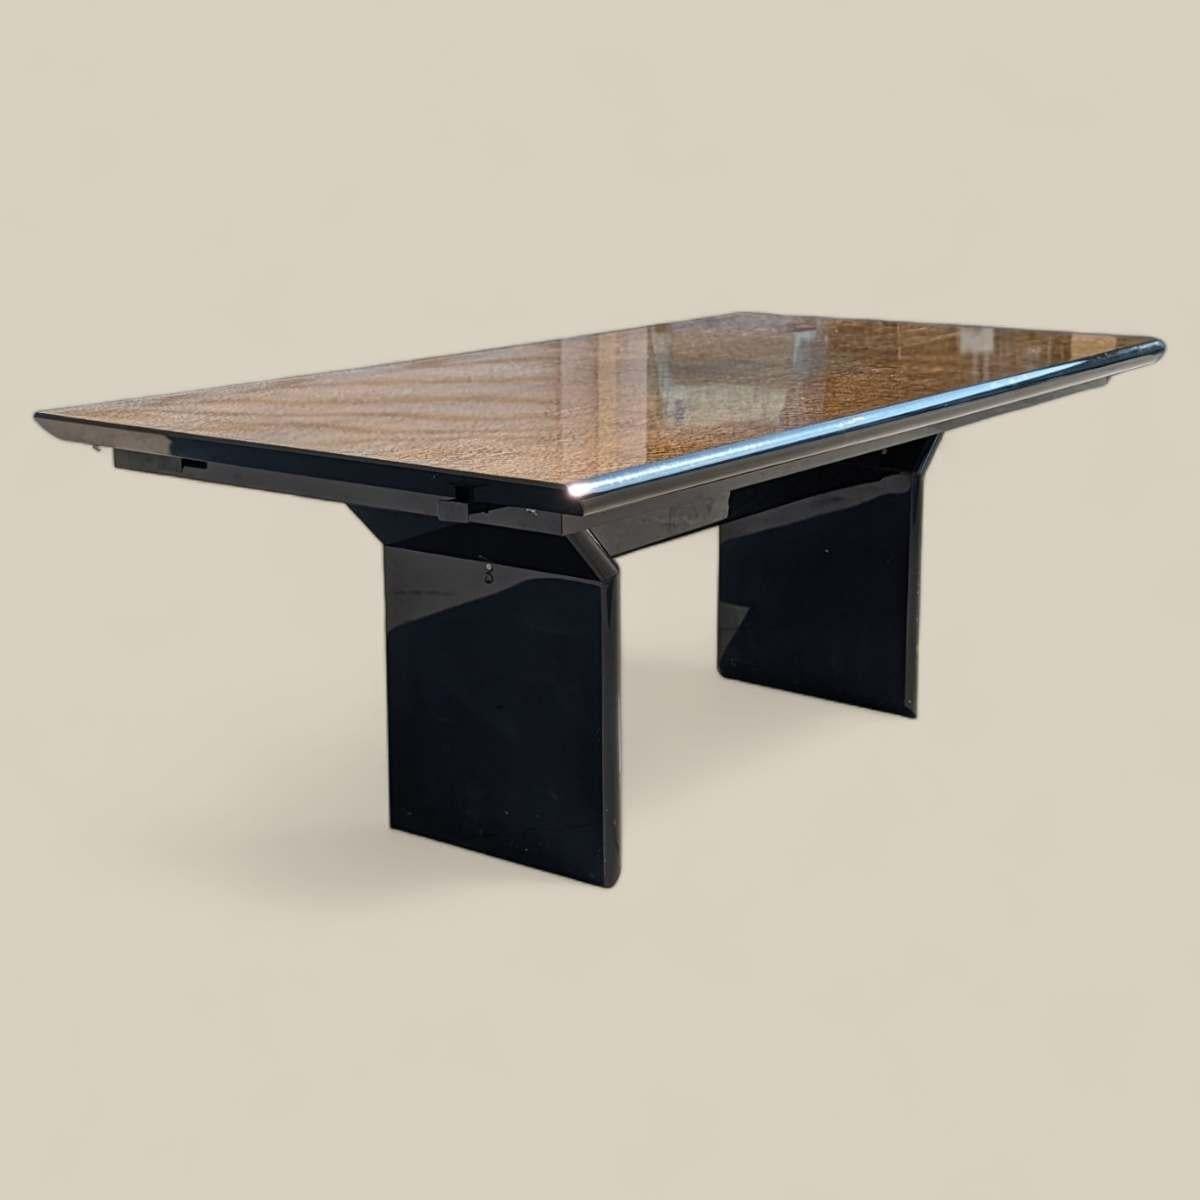 Vintage Saporiti Italia Snakewood Black Lacquer Dining Table, Giorgio Collection For Sale 2